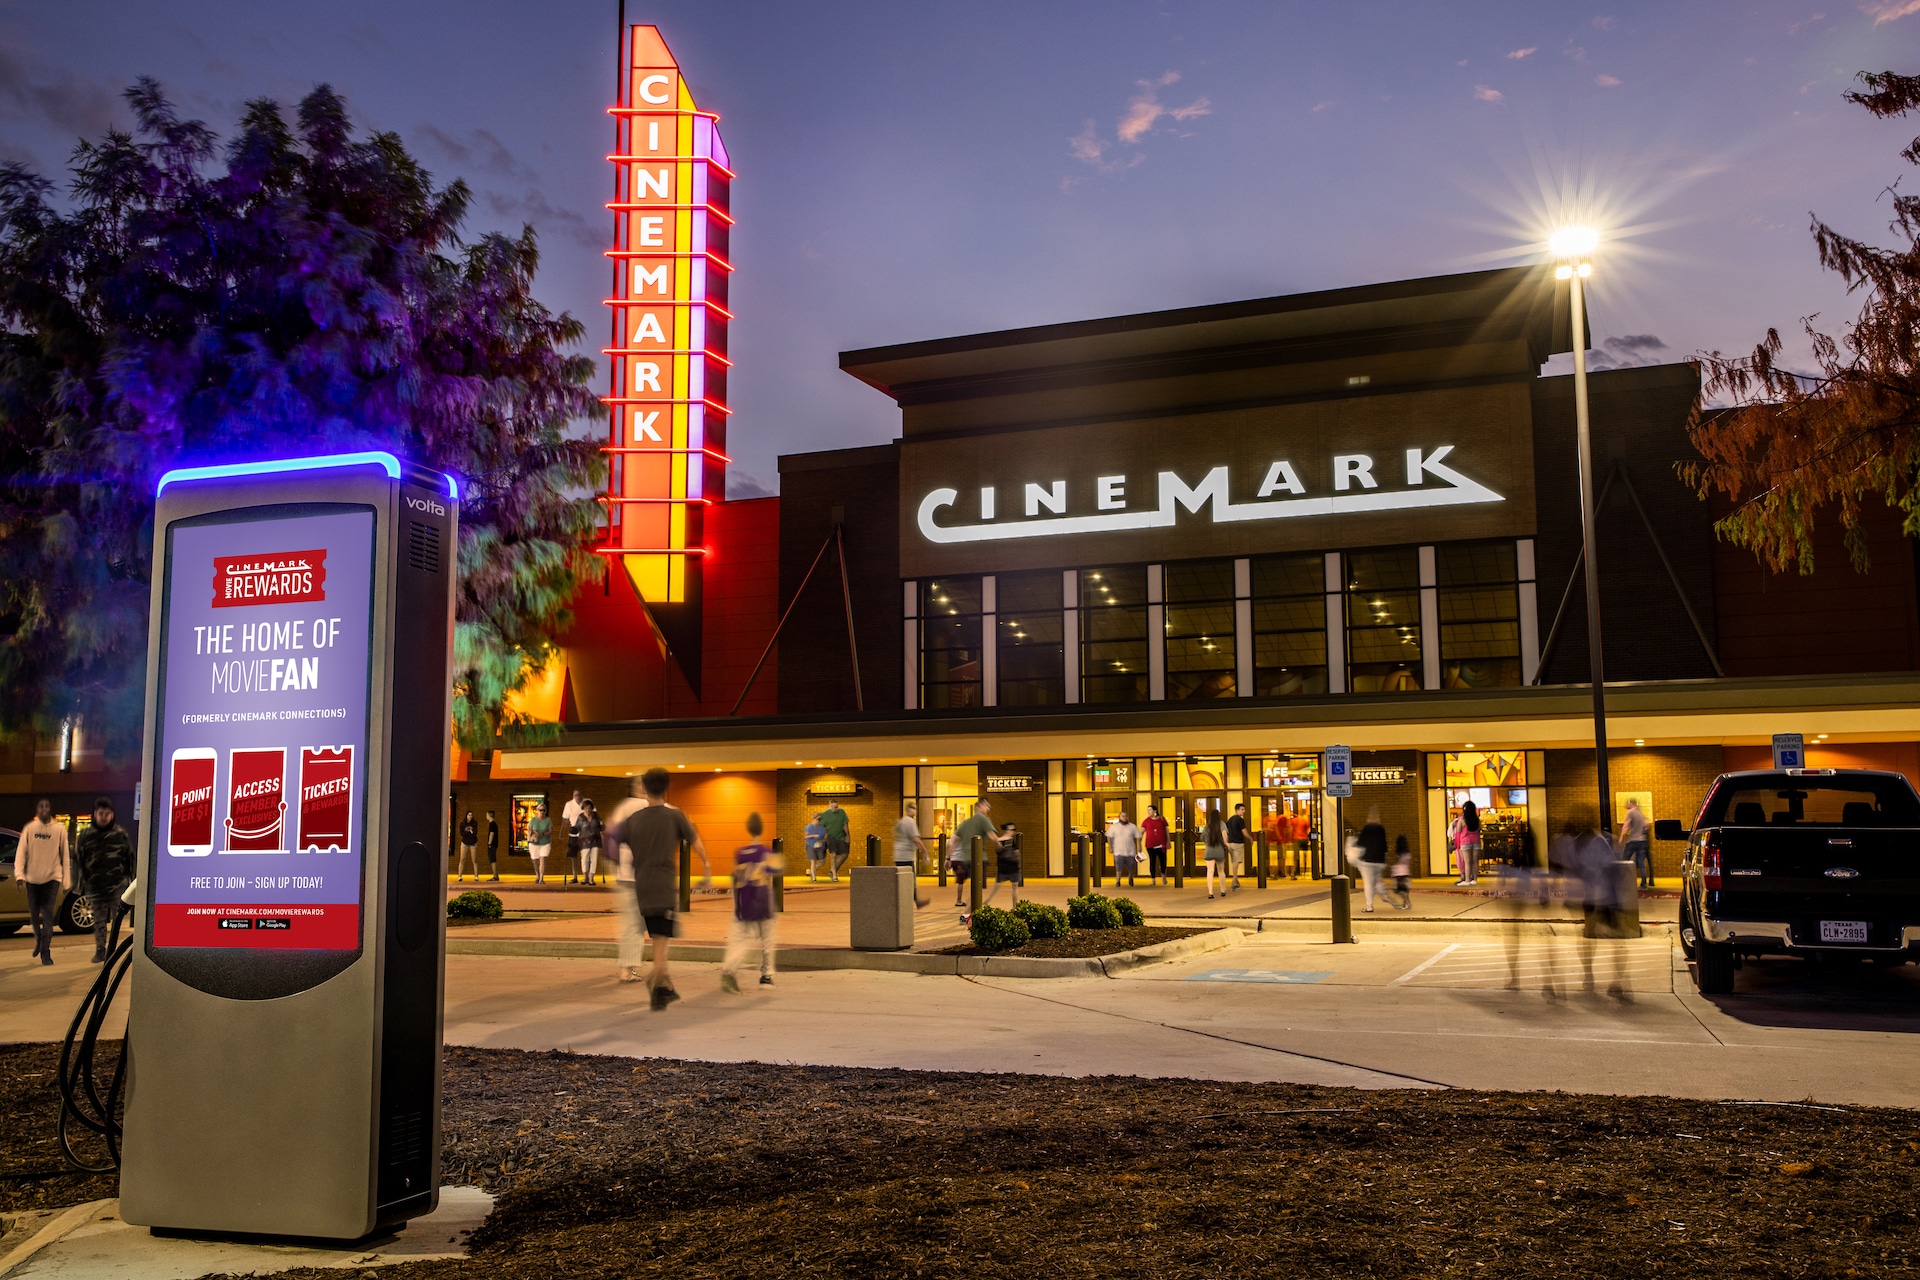 Volta Partnership With Cinemark Theatres Provides Electric Vehicle Charging to Moviegoers